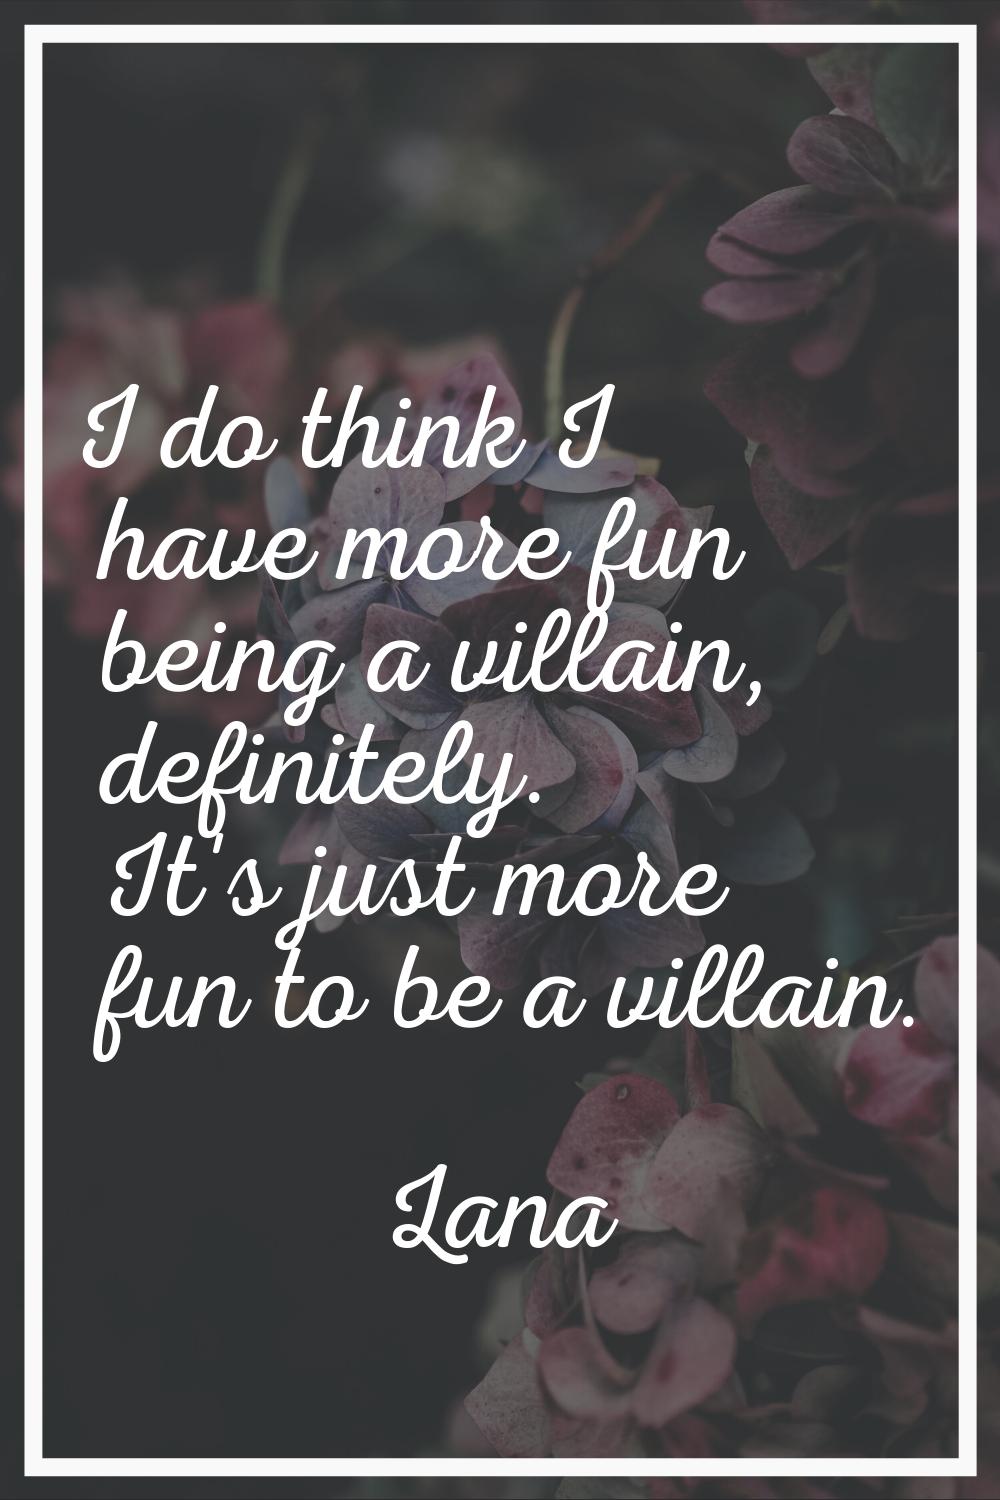 I do think I have more fun being a villain, definitely. It's just more fun to be a villain.